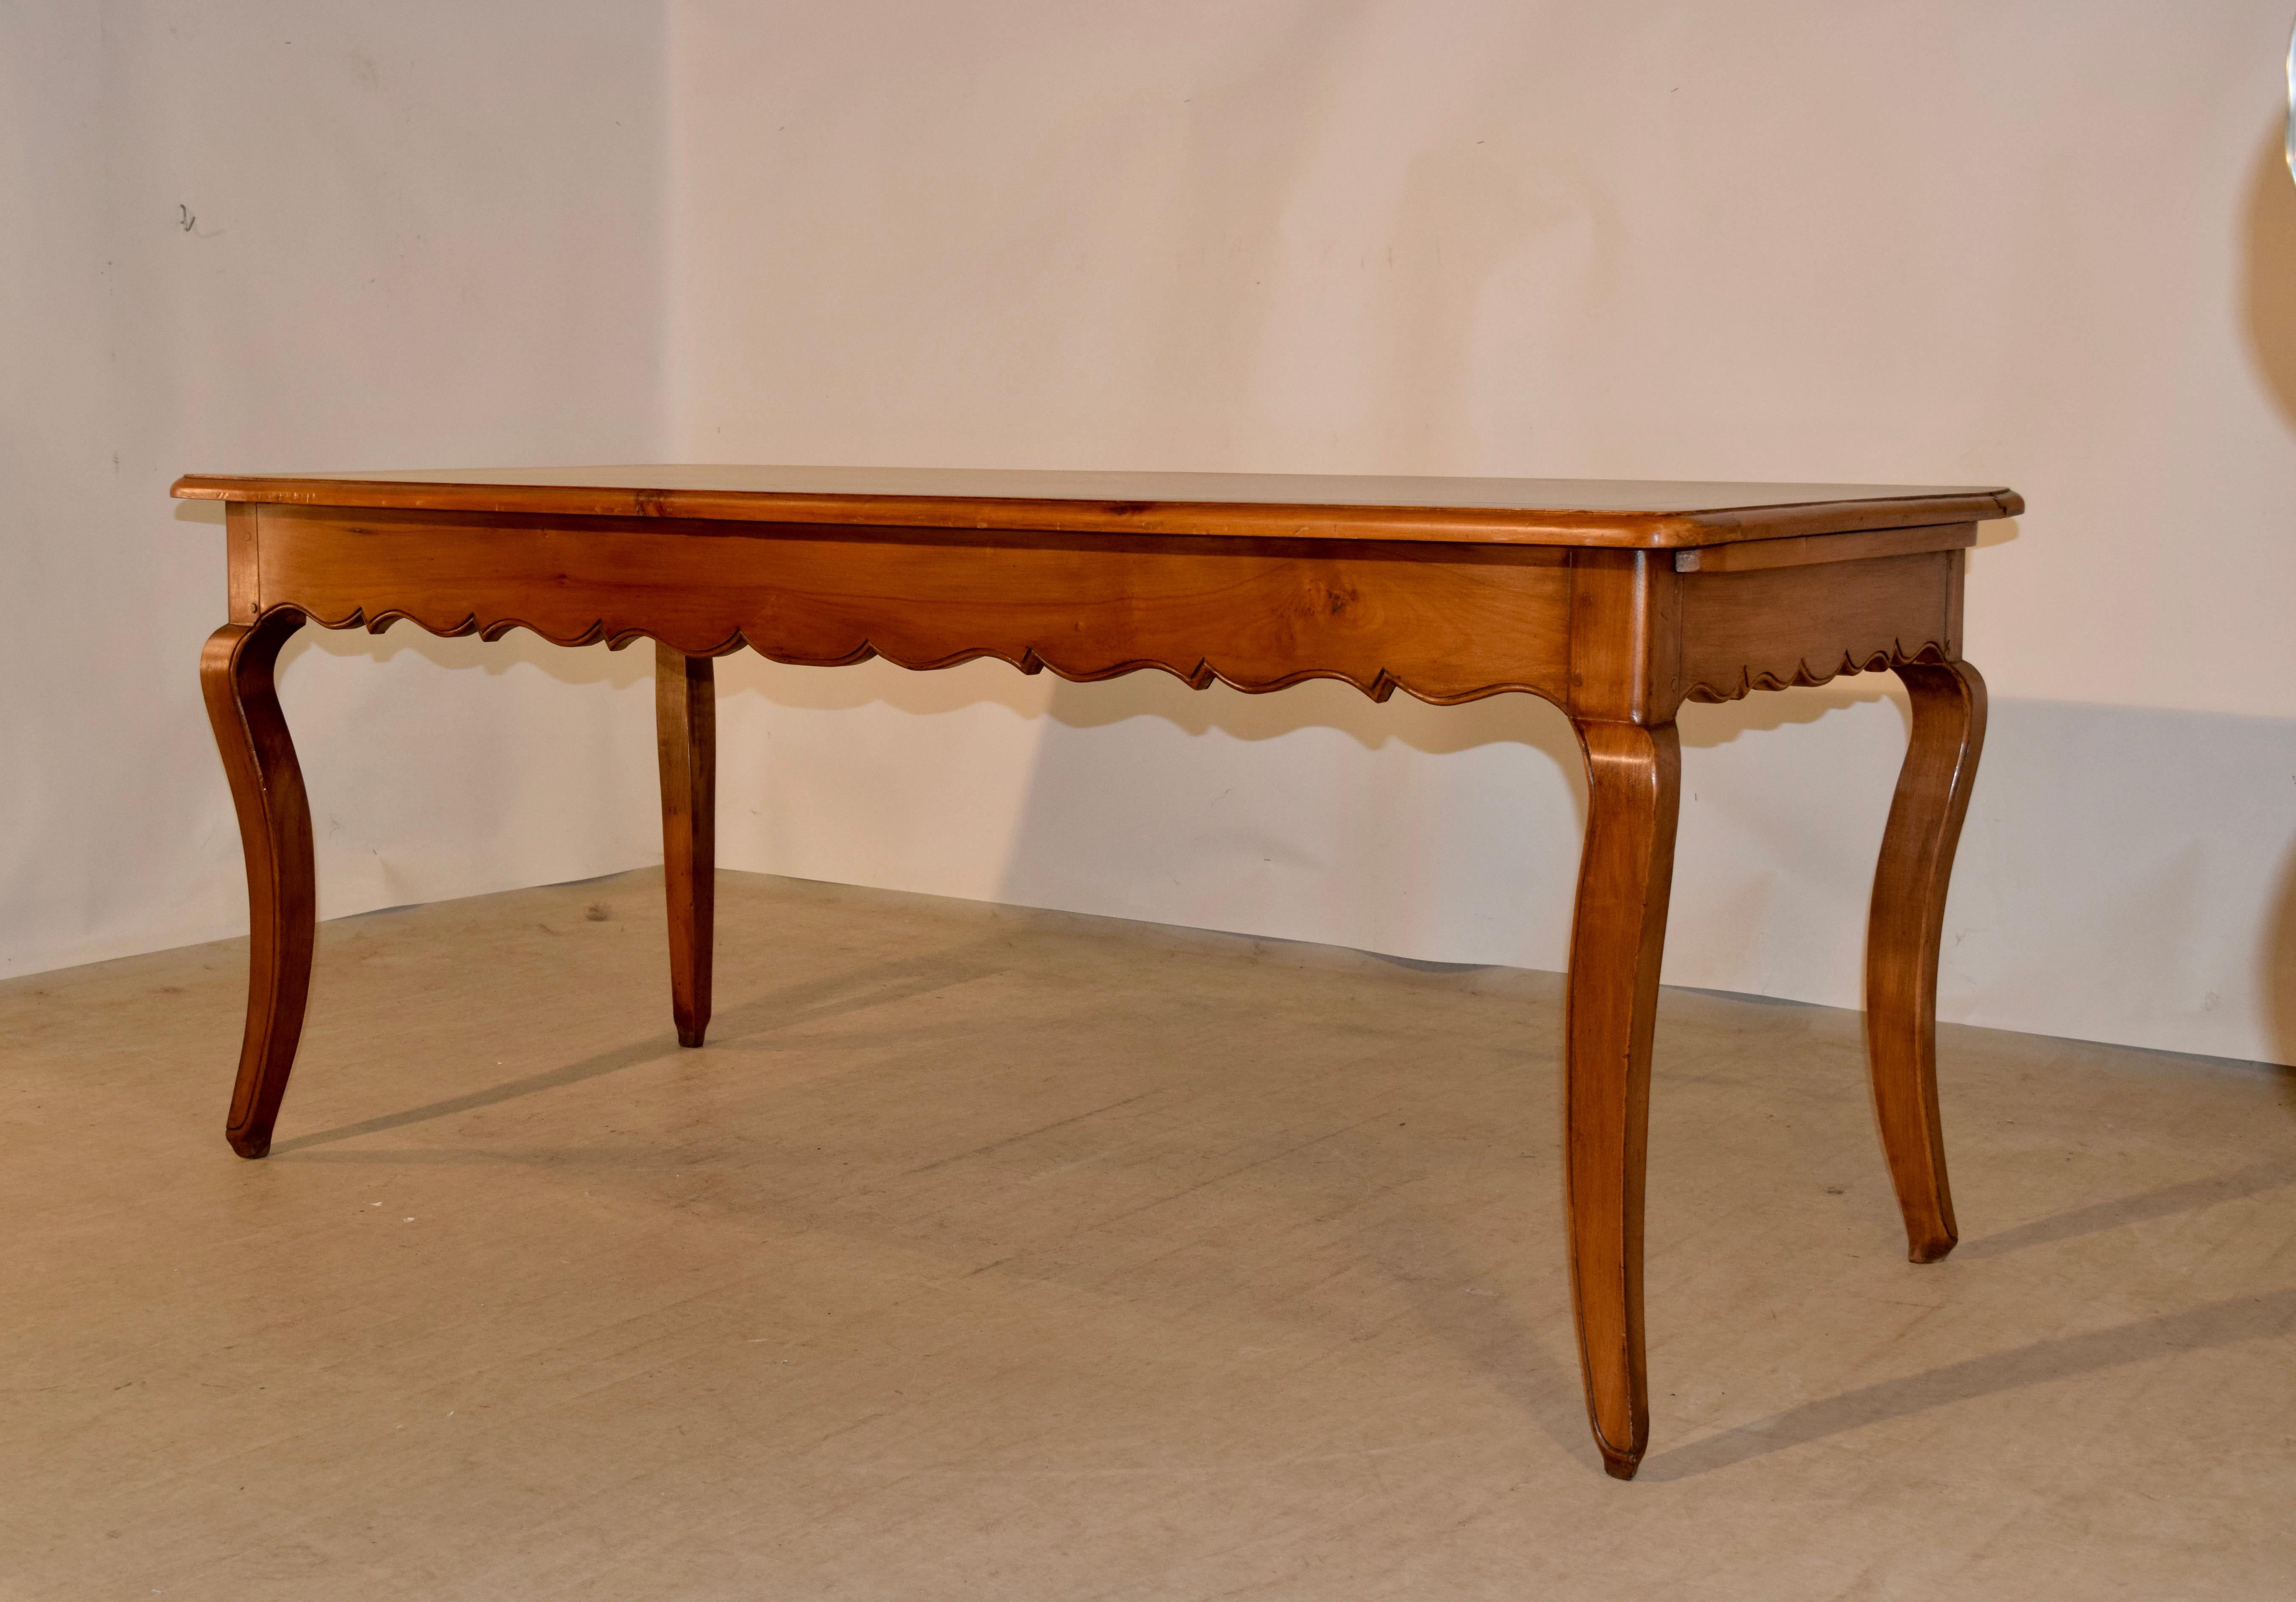 19th century farm table from France made from cherry with a banded top which has wonderful graining following down to a hand scalloped apron which contains a single drawer on one end and a bread board on the other. The table is supported on cabriole